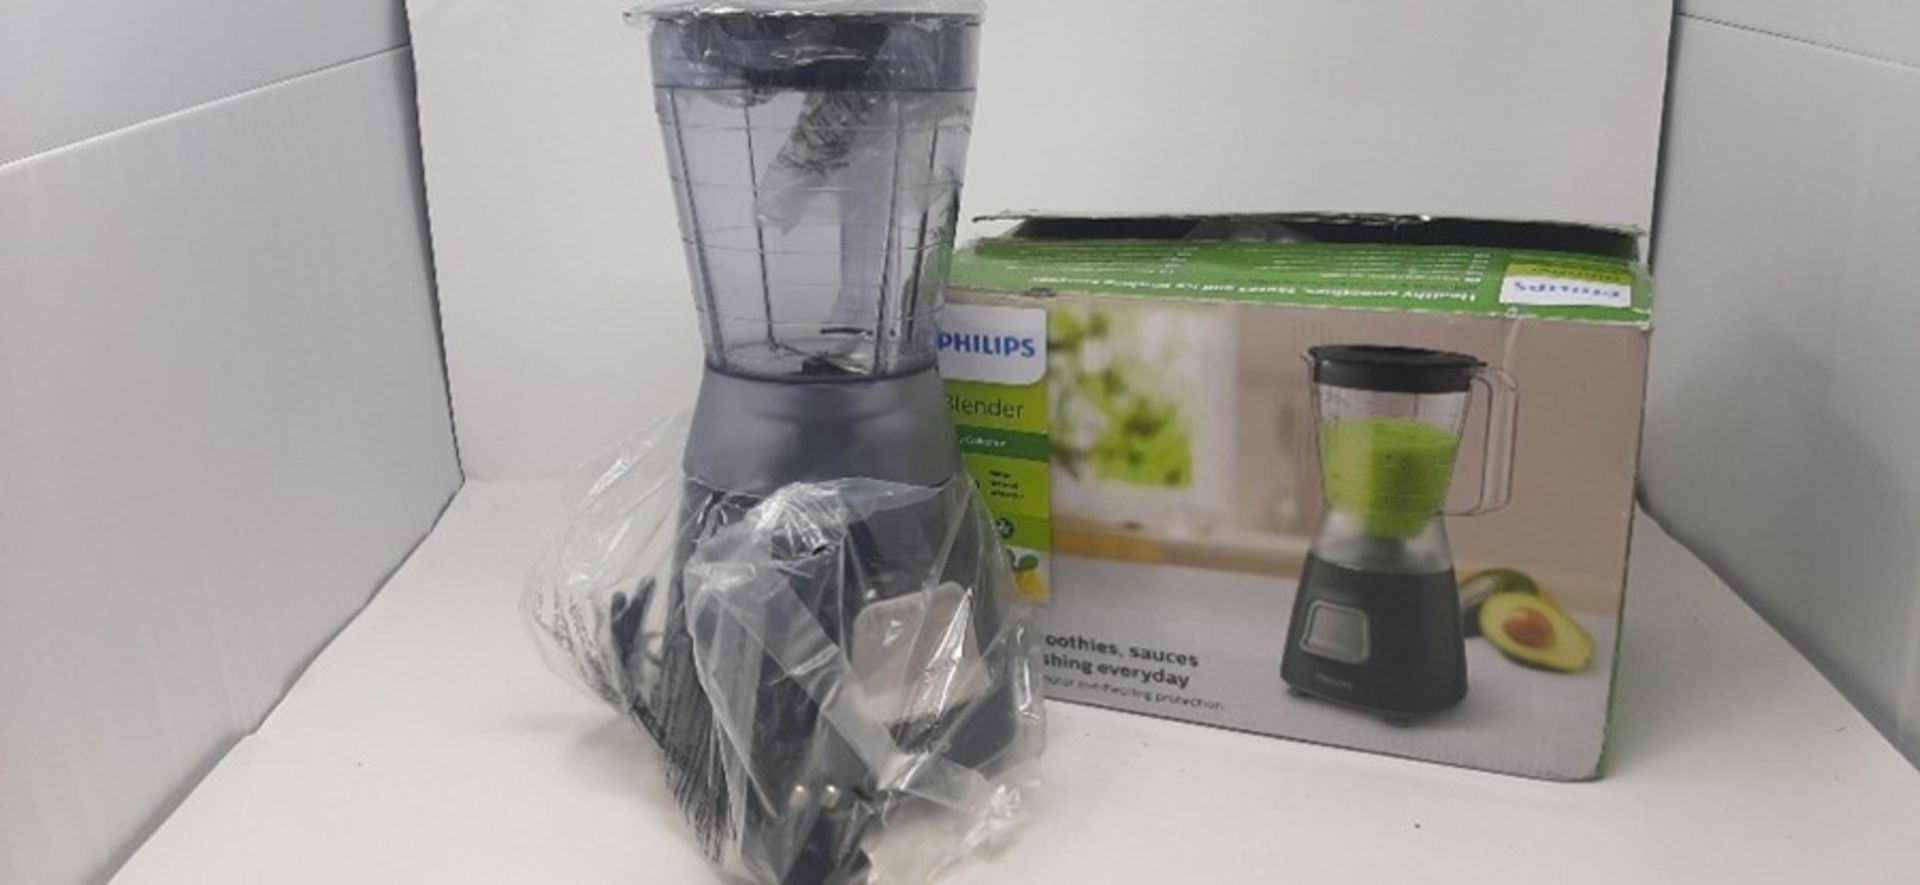 Philips Daily Collection Blender, 1.25 Litre, 450W, Black, HR2052/91 - Image 2 of 2